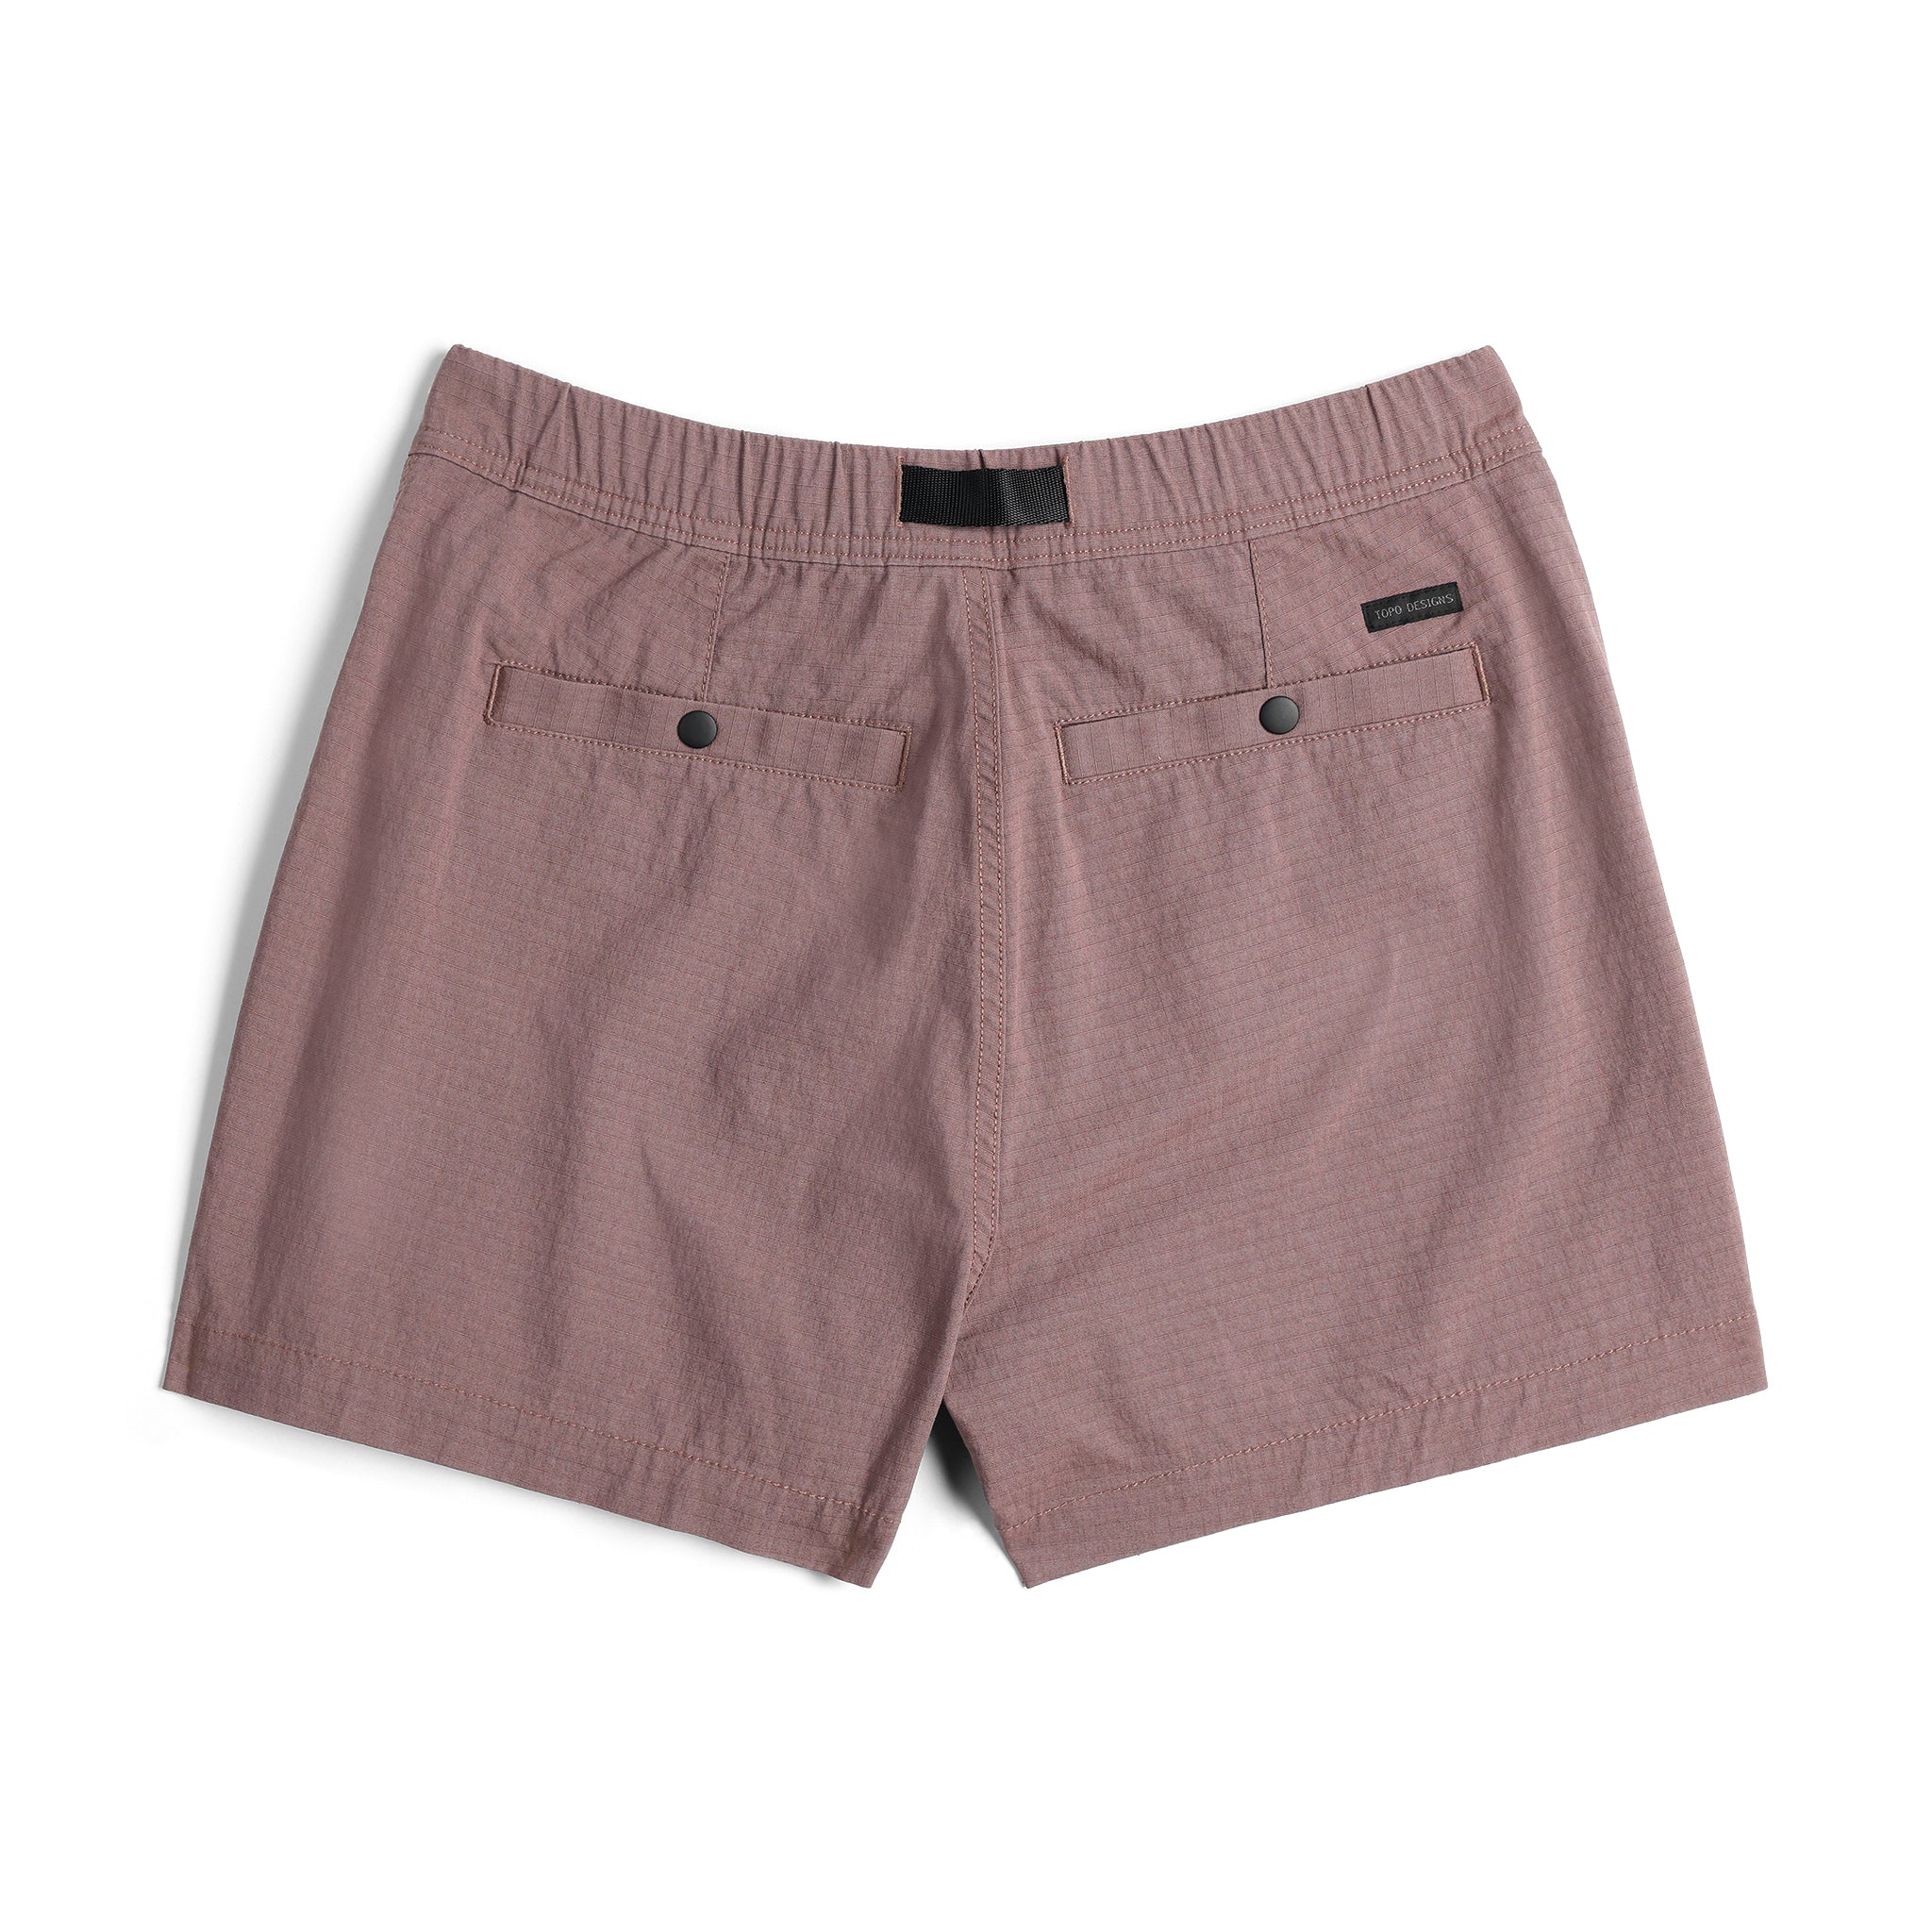 Back View of Topo Designs Mountain Short Ripstop - Women's in "Peppercorn"